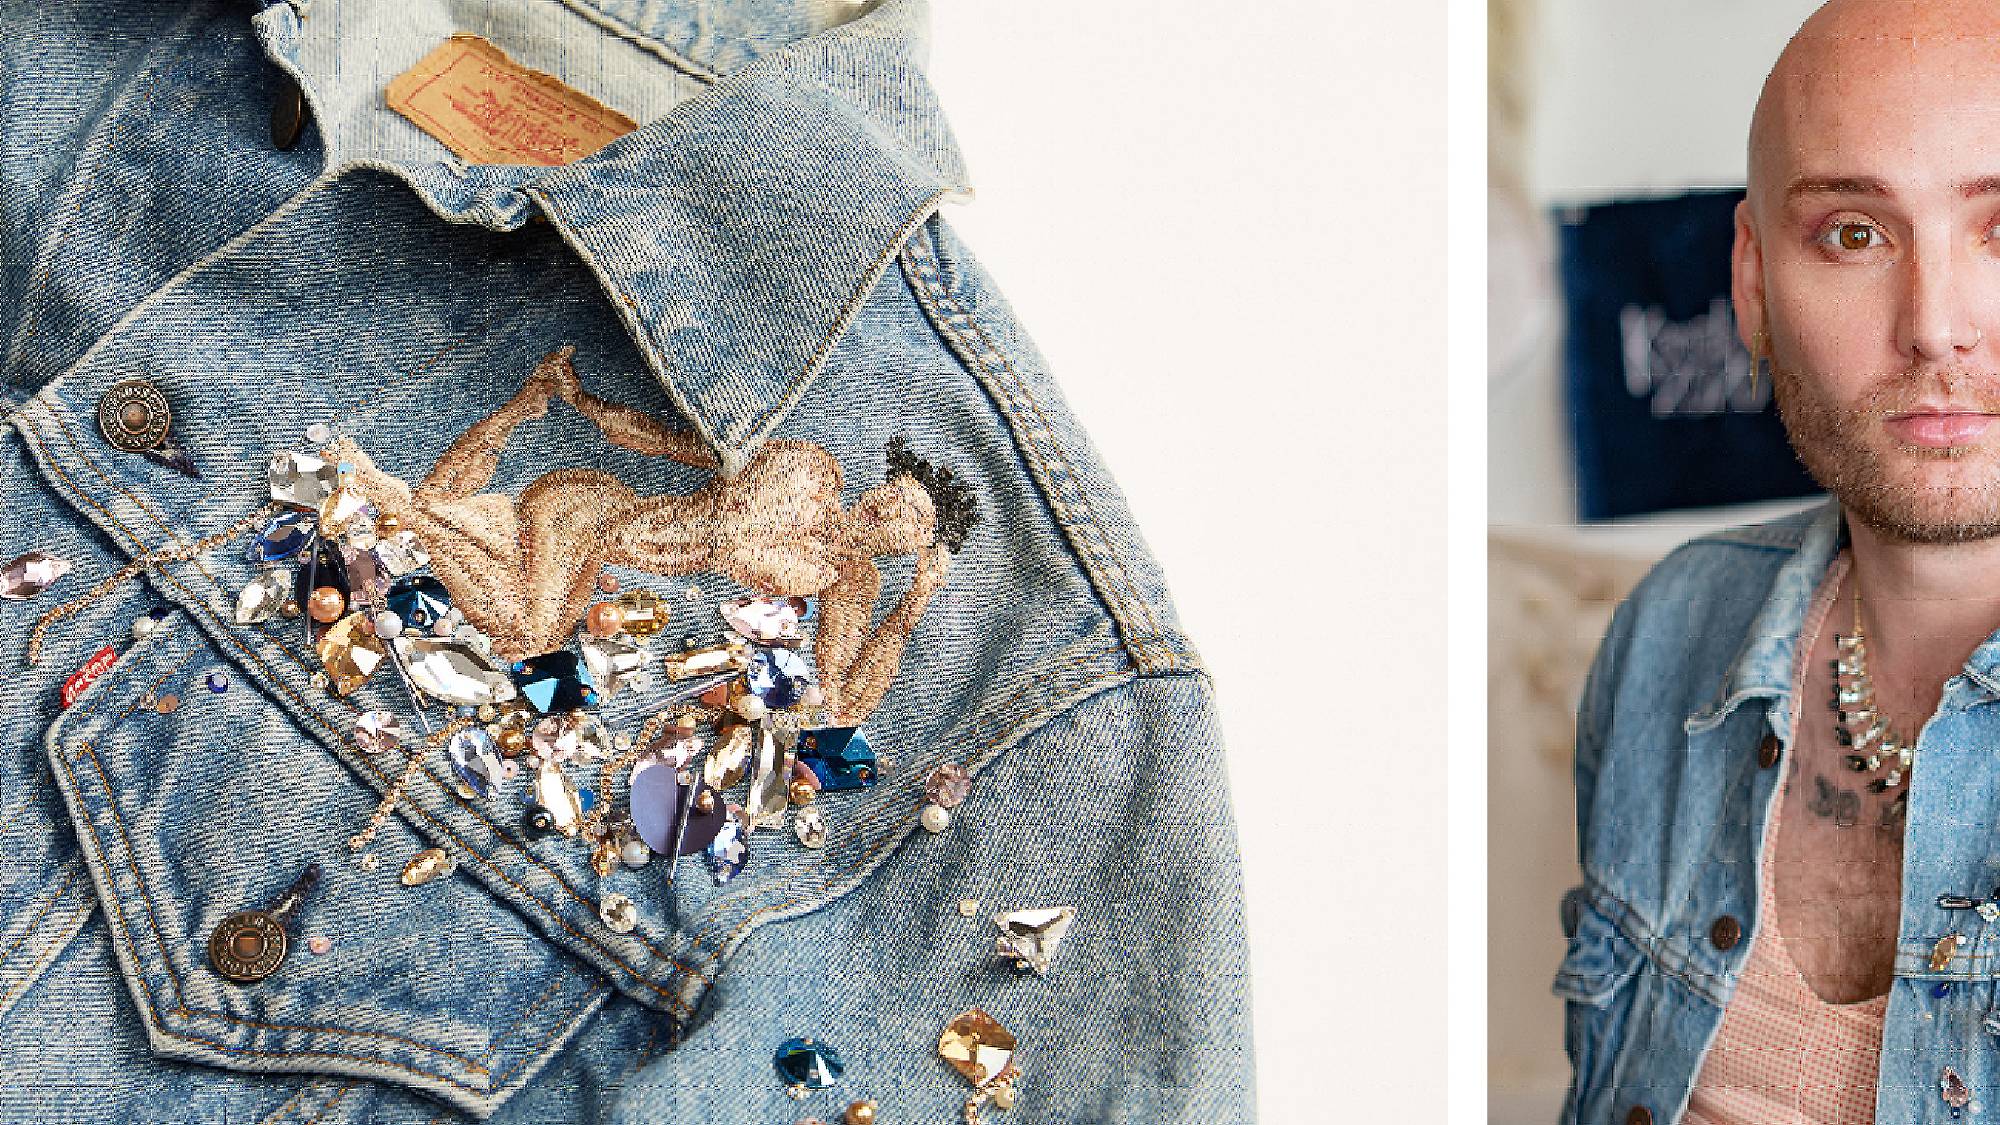 Two images of the Levi's® x Michael-Birch Pierce collaboration. The right image if a close-up shot of the embroidery on the trucker jacket for the collaboration. The right image is of Michael-Birch Pierce wearing the jacket they created.